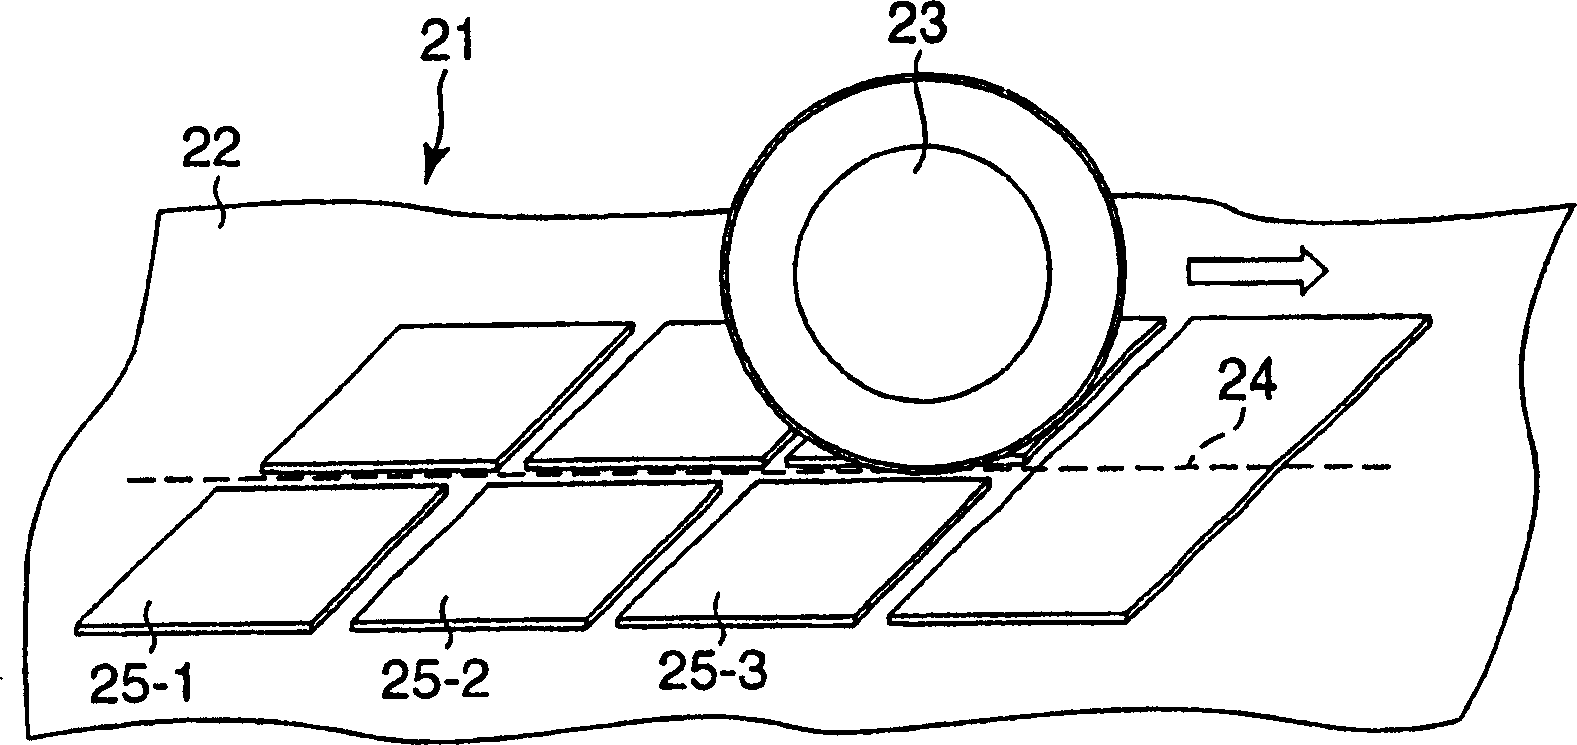 Method and equipment for manufacturing semiconductor devices